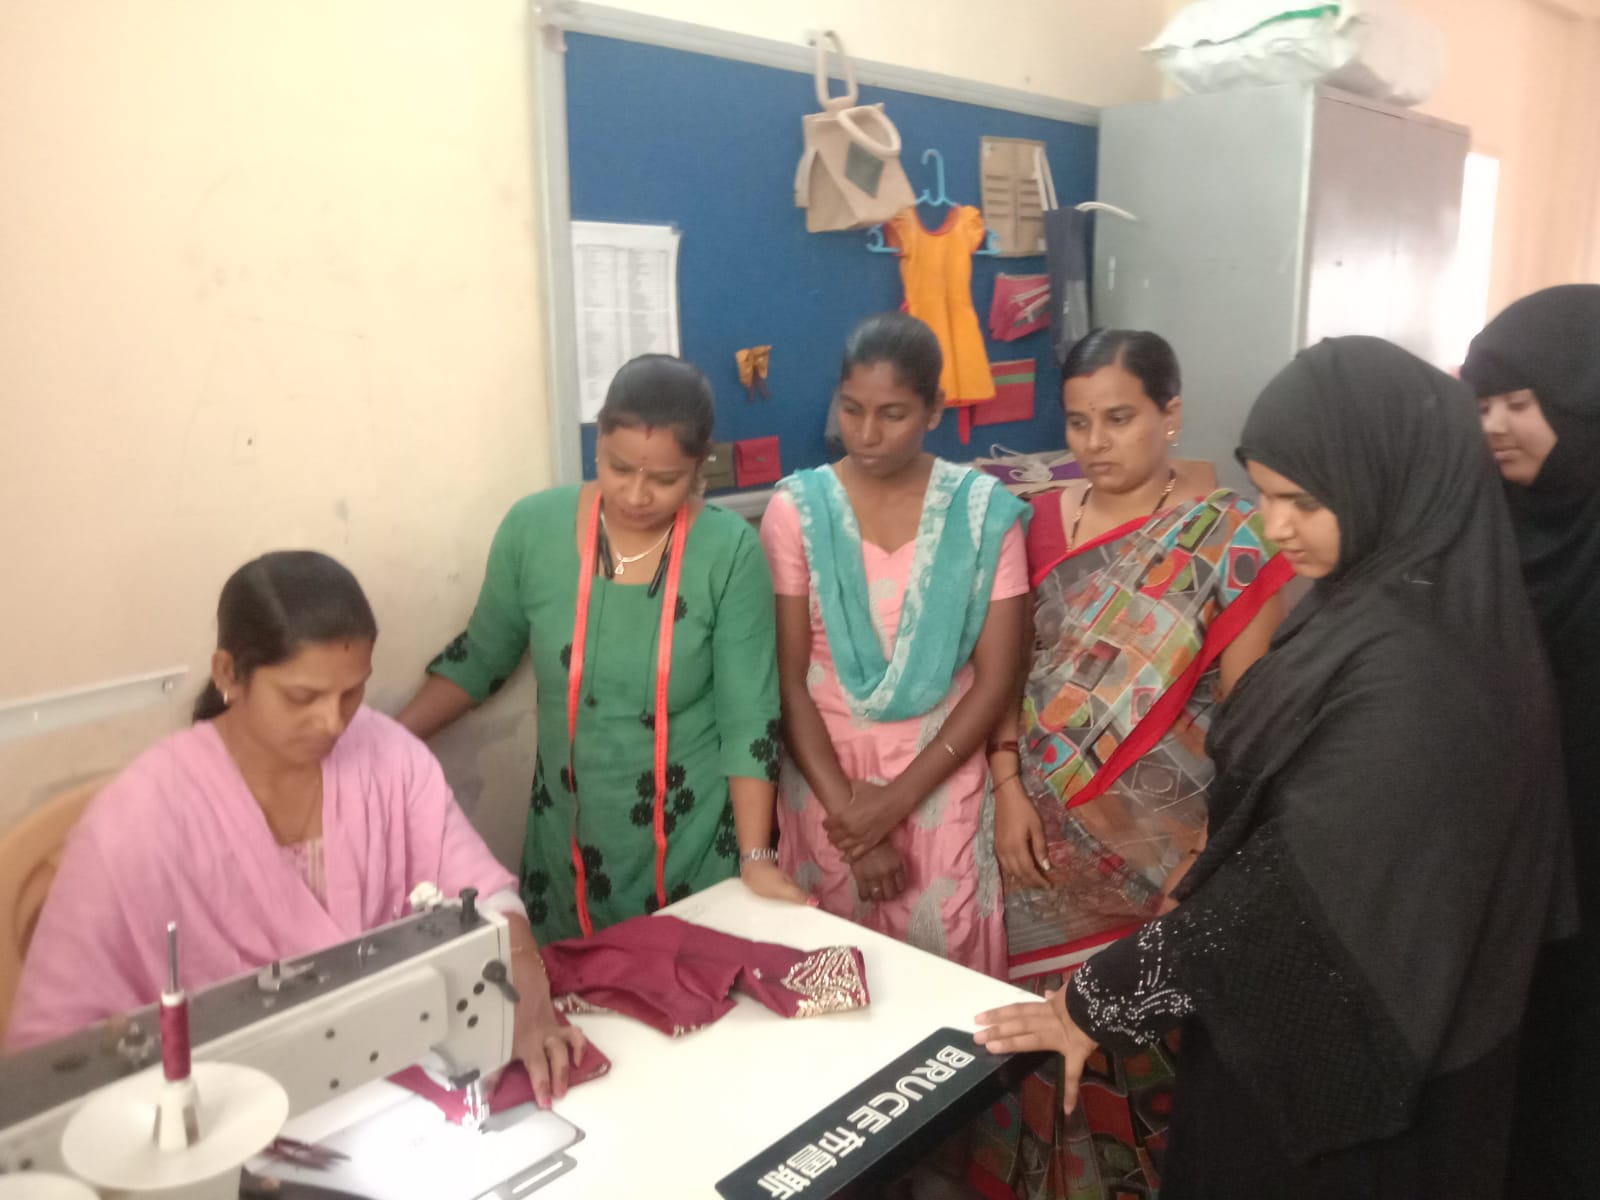 A group of women gathers around a sewing machine